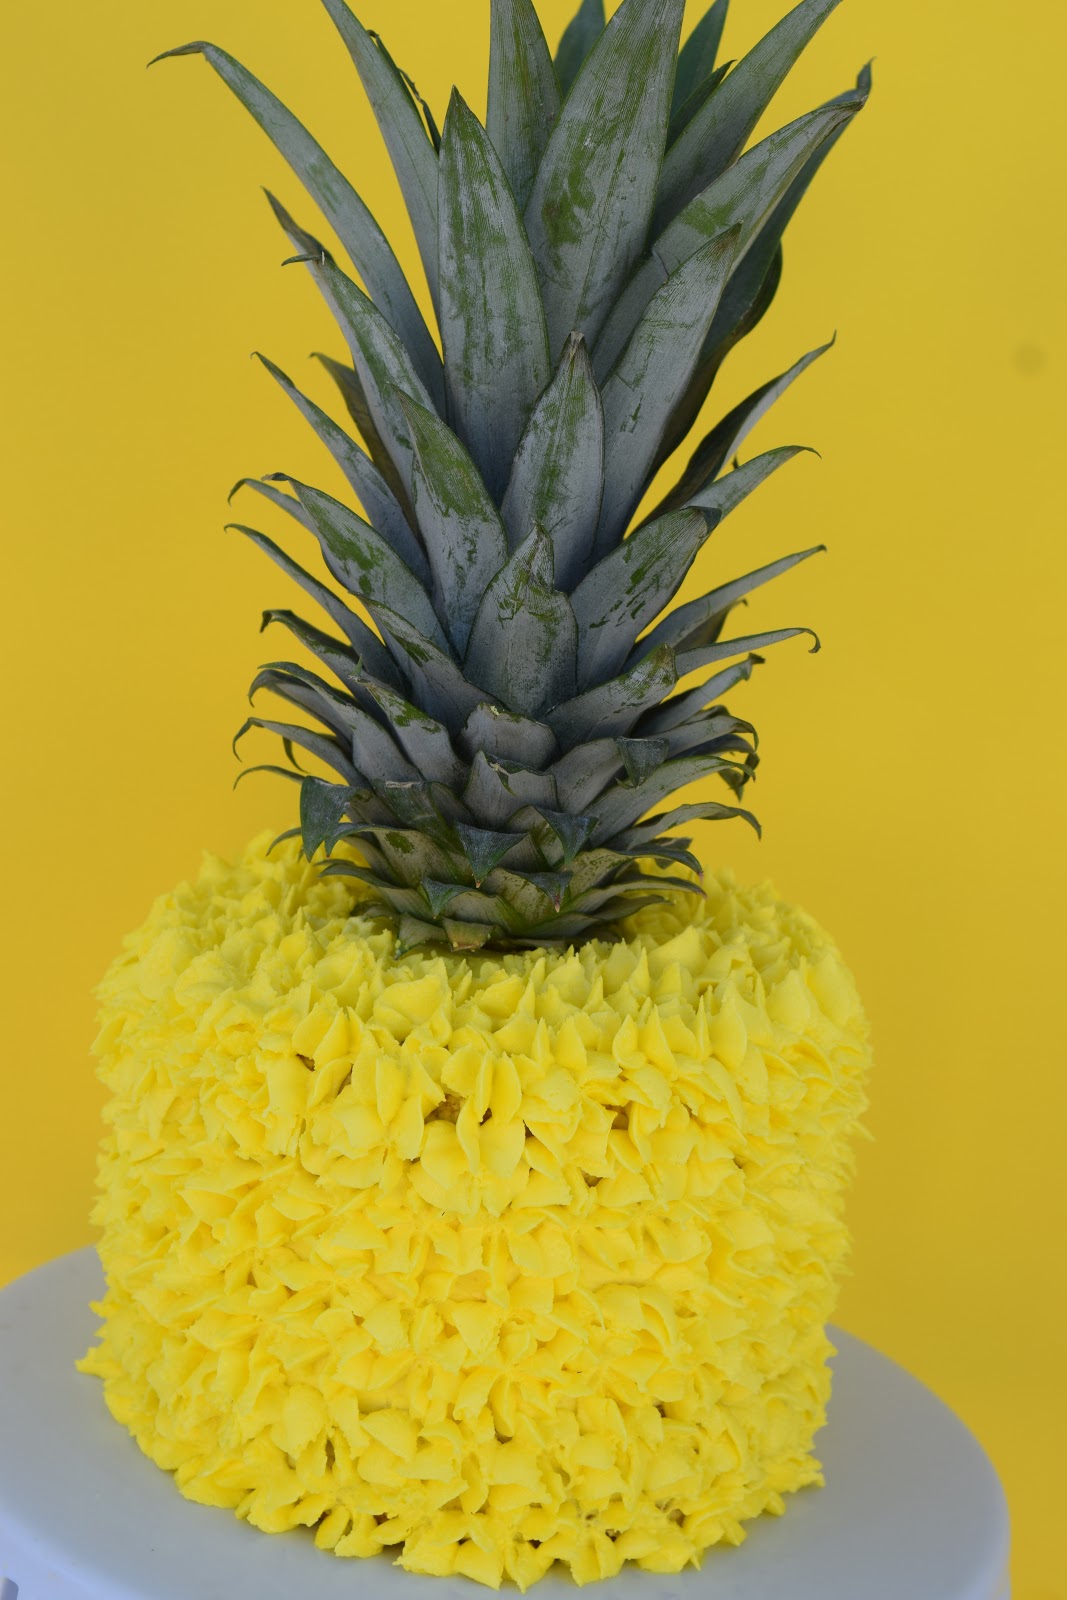 Red Couch Recipes: Pineapple Cake